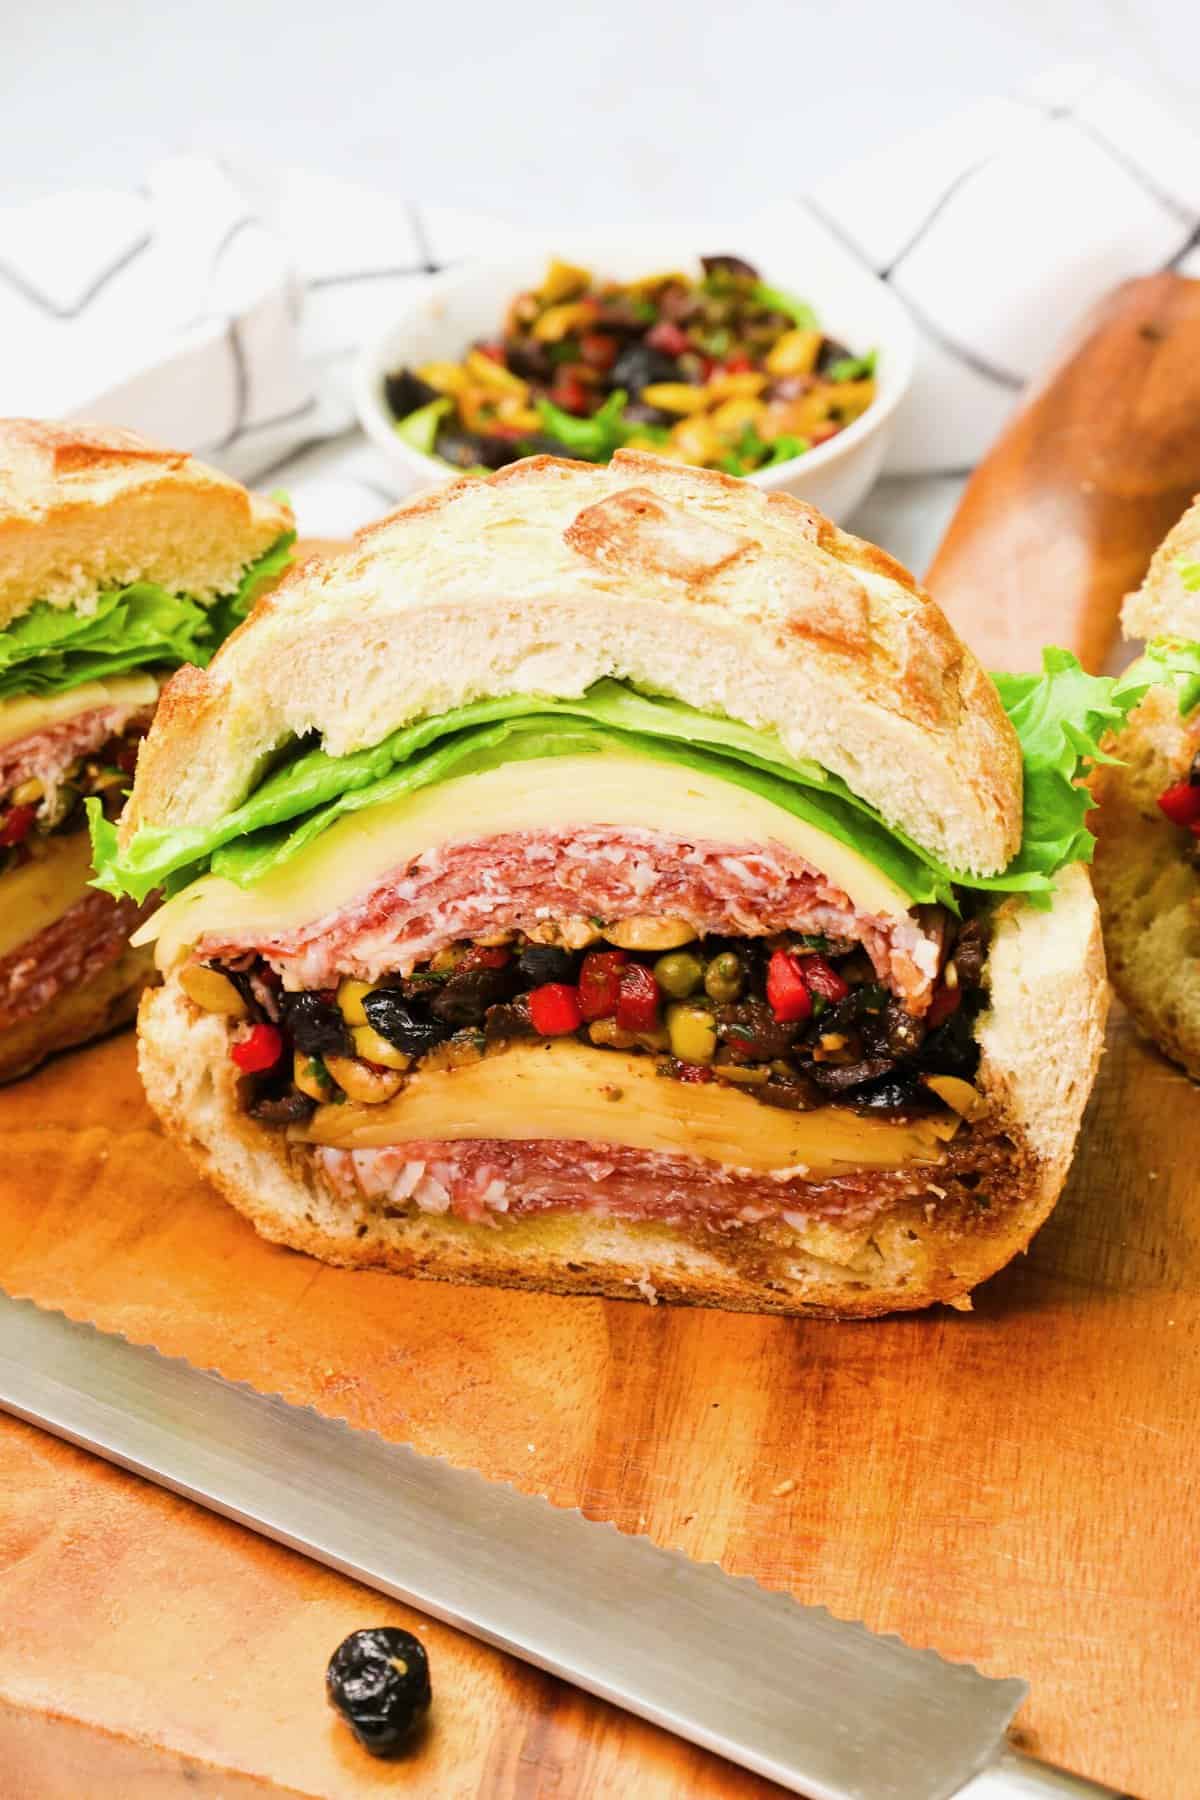 Insider's view of a crazy delicious muffaletta sandwich